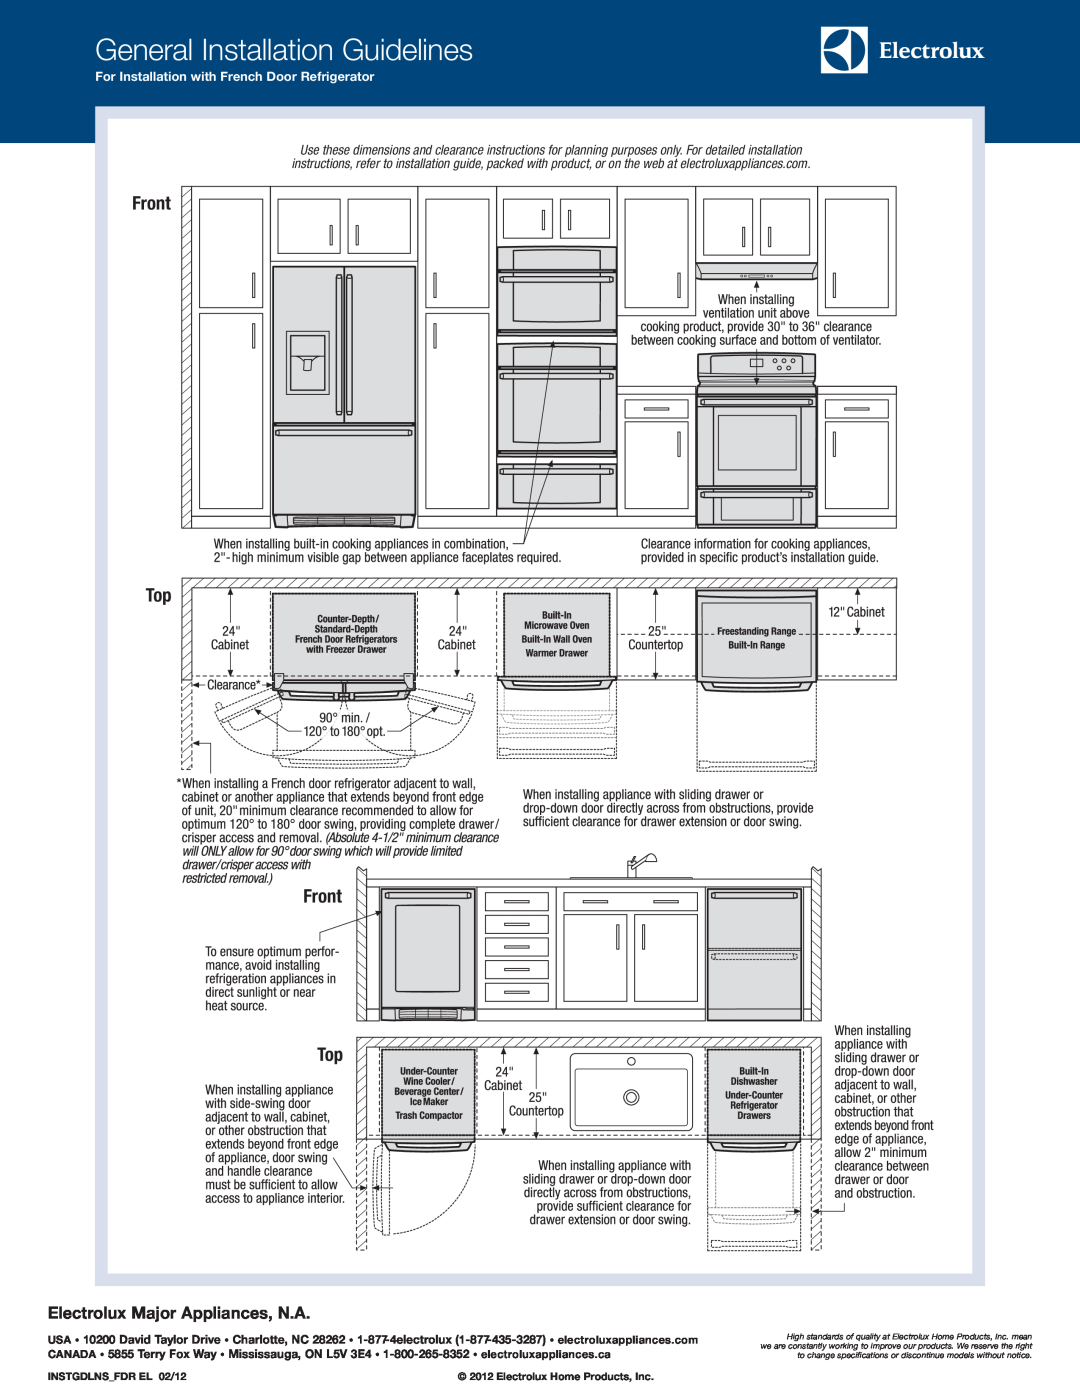 Electrolux EW30SO60L S General Installation Guidelines, Front Top, Electrolux Major Appliances, N.A, INSTGDLNSFDR EL 02/12 